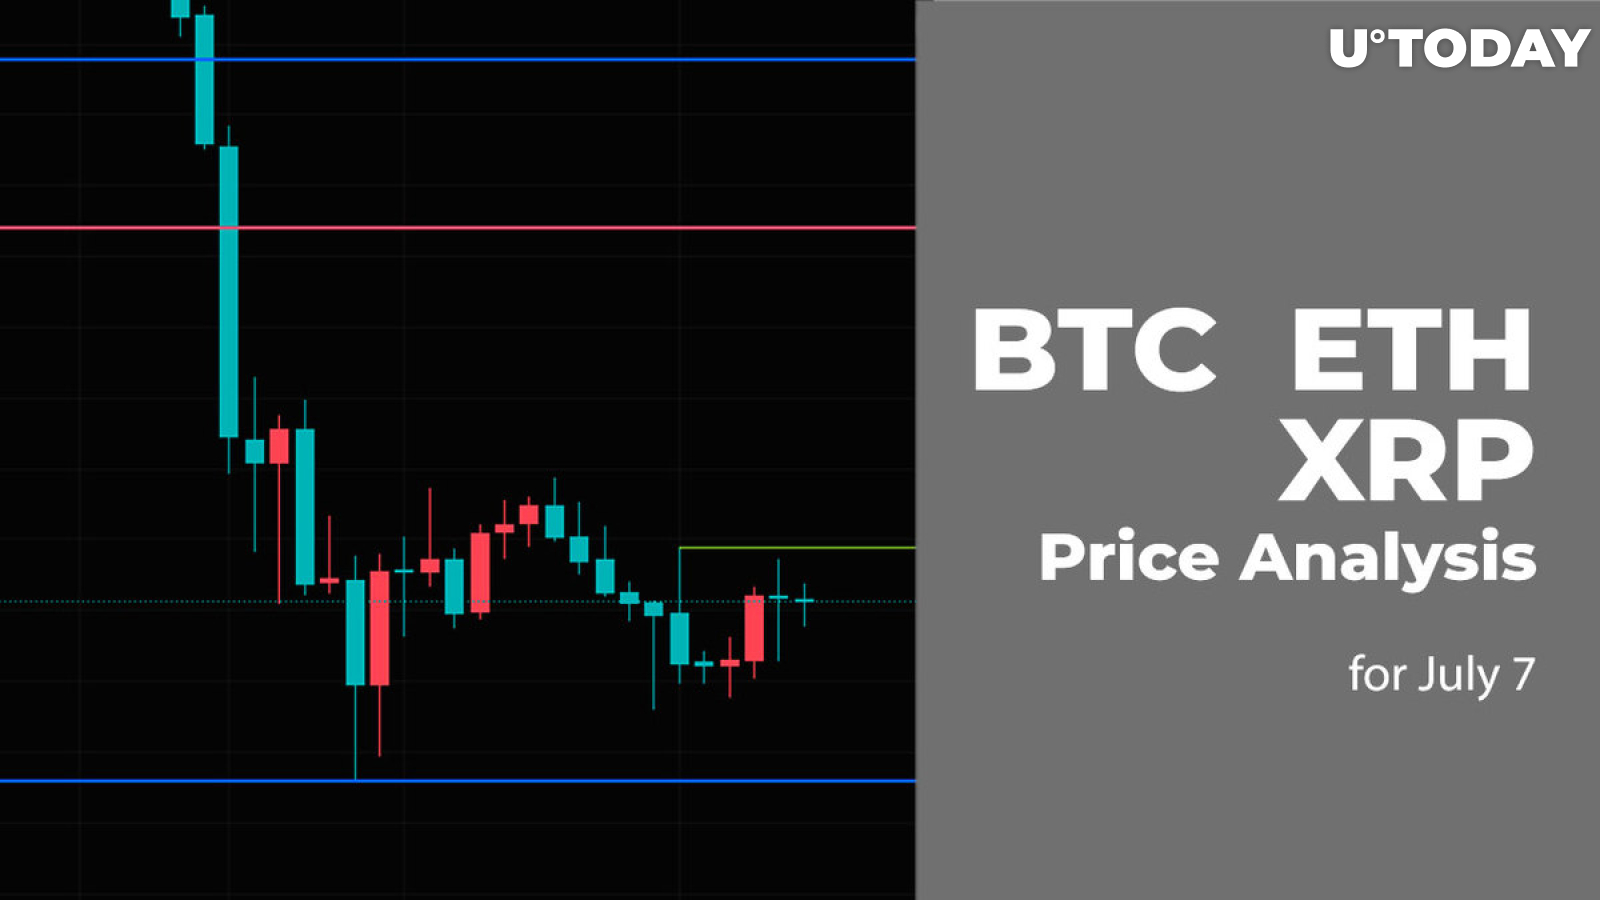 BTC, ETH and XRP Price Analysis for July 7